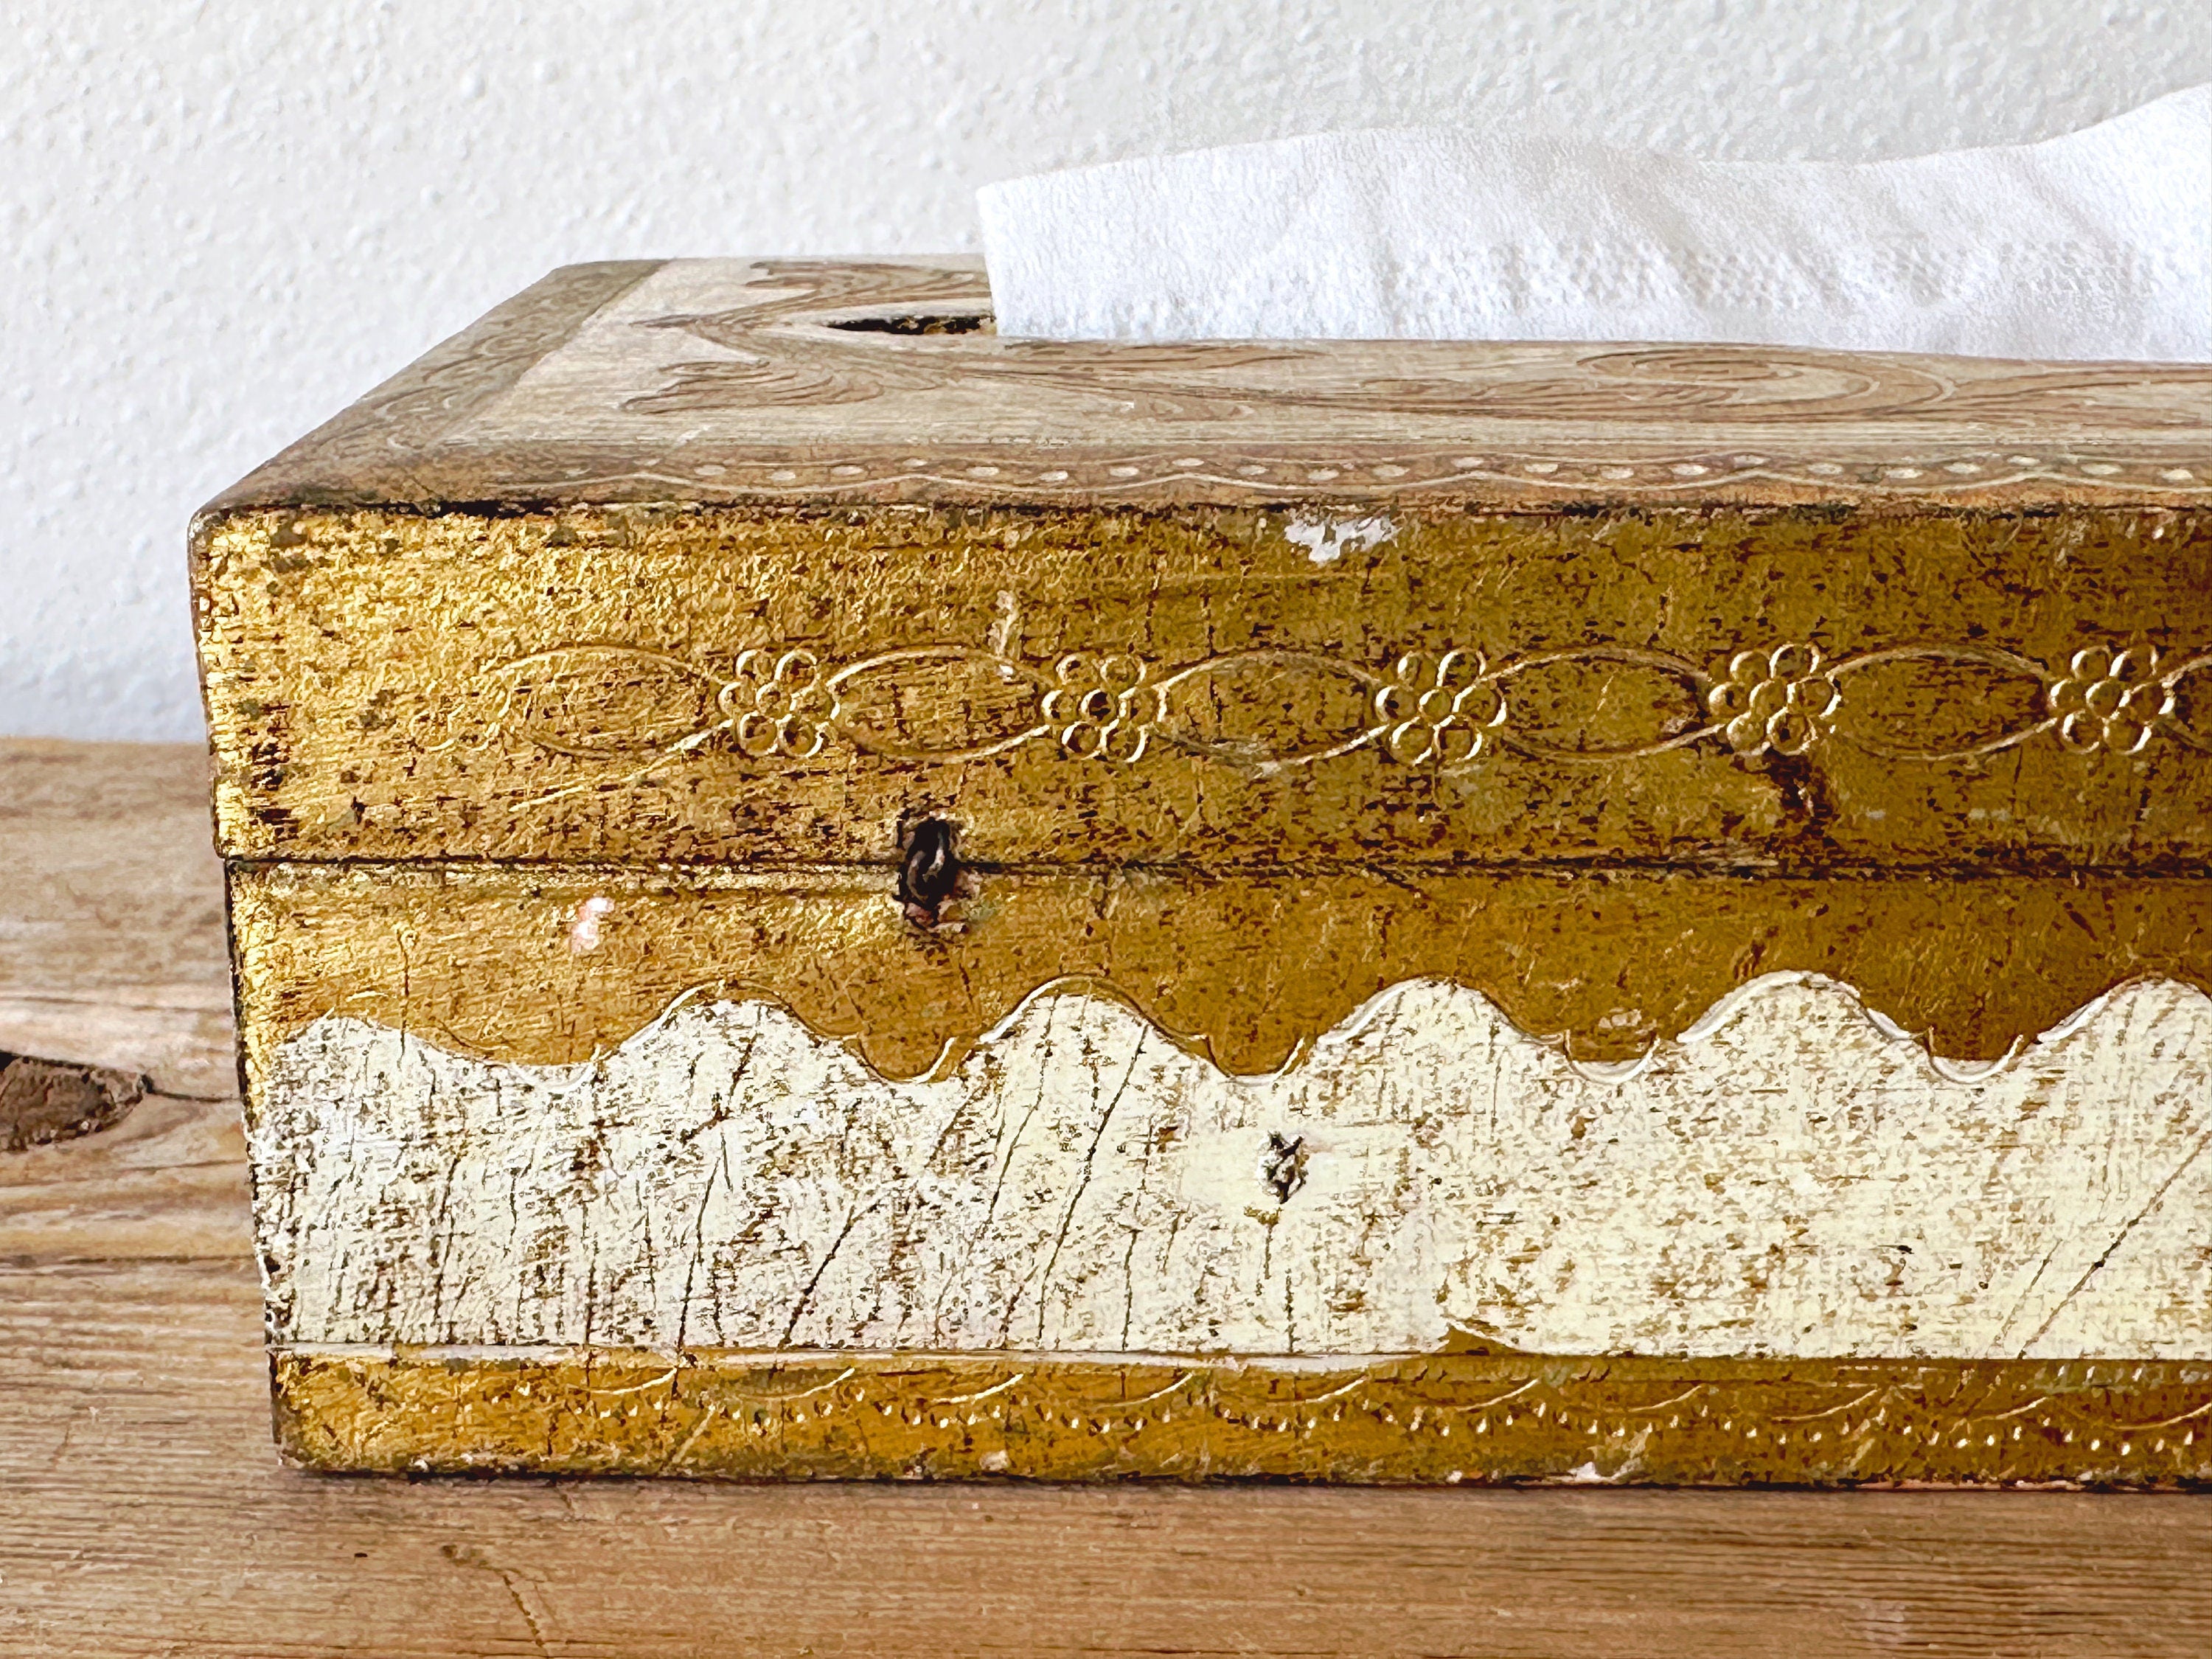 Vintage Italian Florentine Gilt-Wood Tissue Box | Cream and Gold Distressed Wooden Trinket Box | Bedroom Vanity Decor | Gift for Her